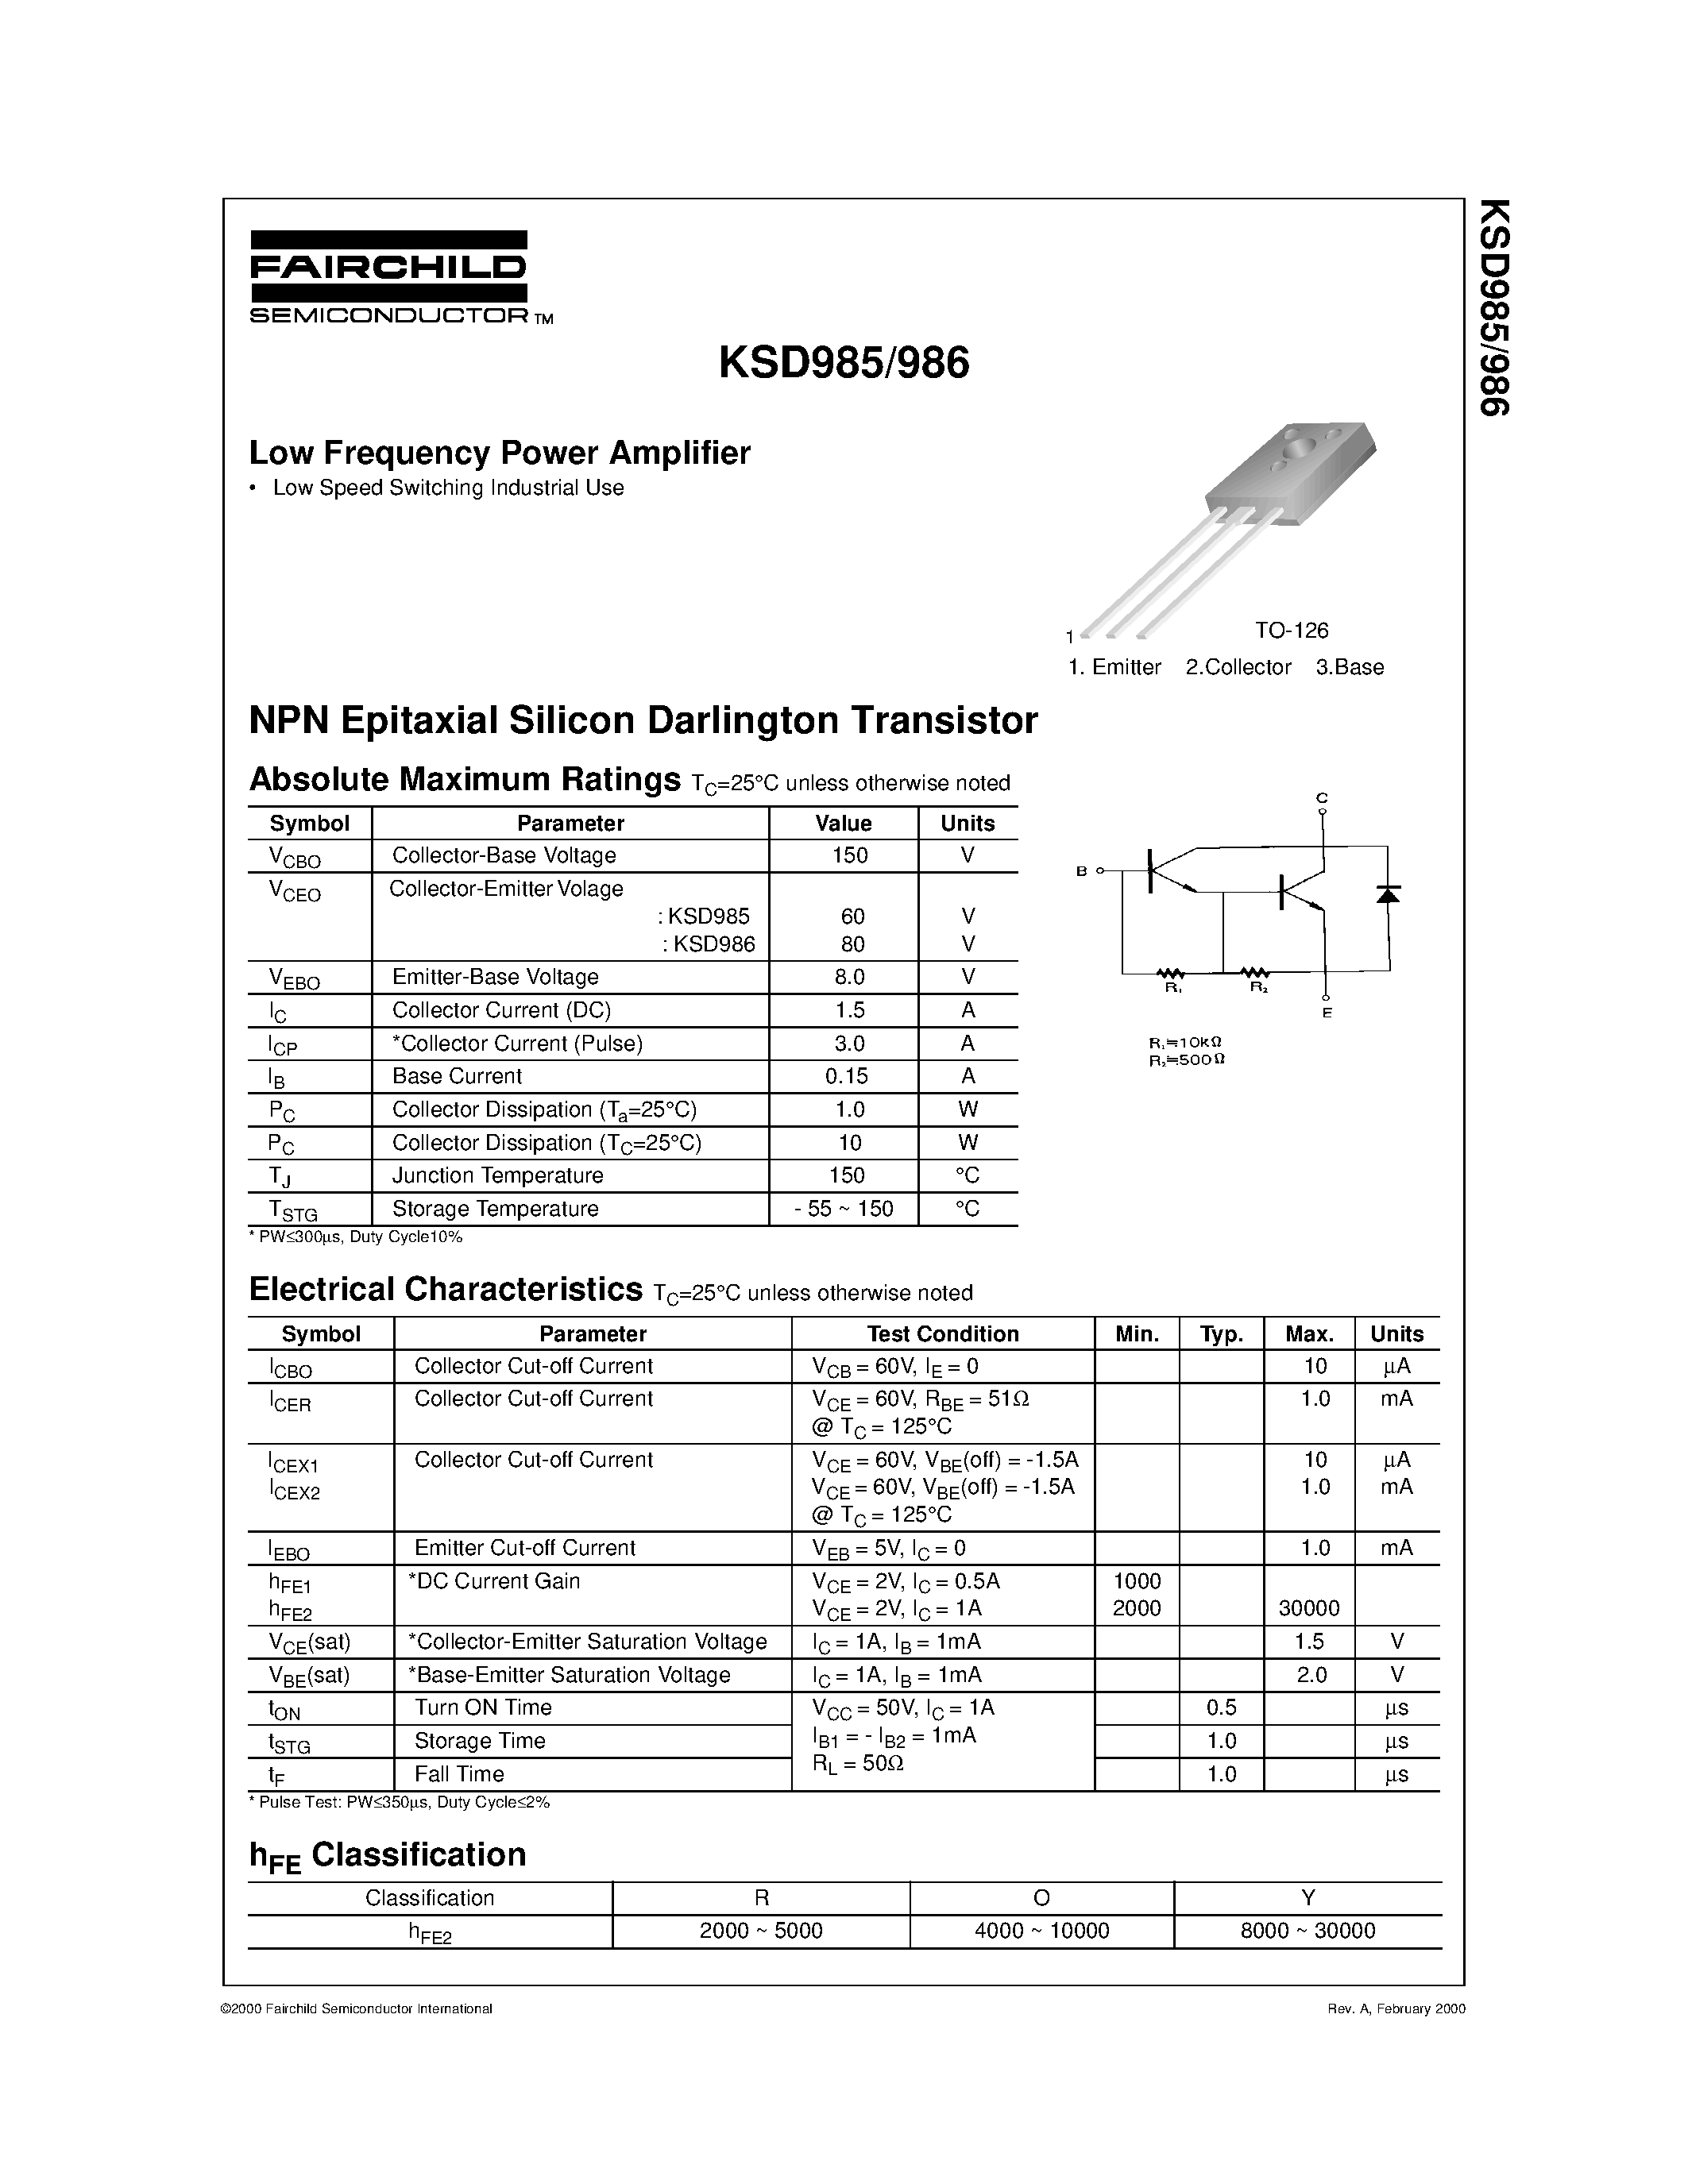 Datasheet KSD986 - Audio Frequency Power Amplifier page 1